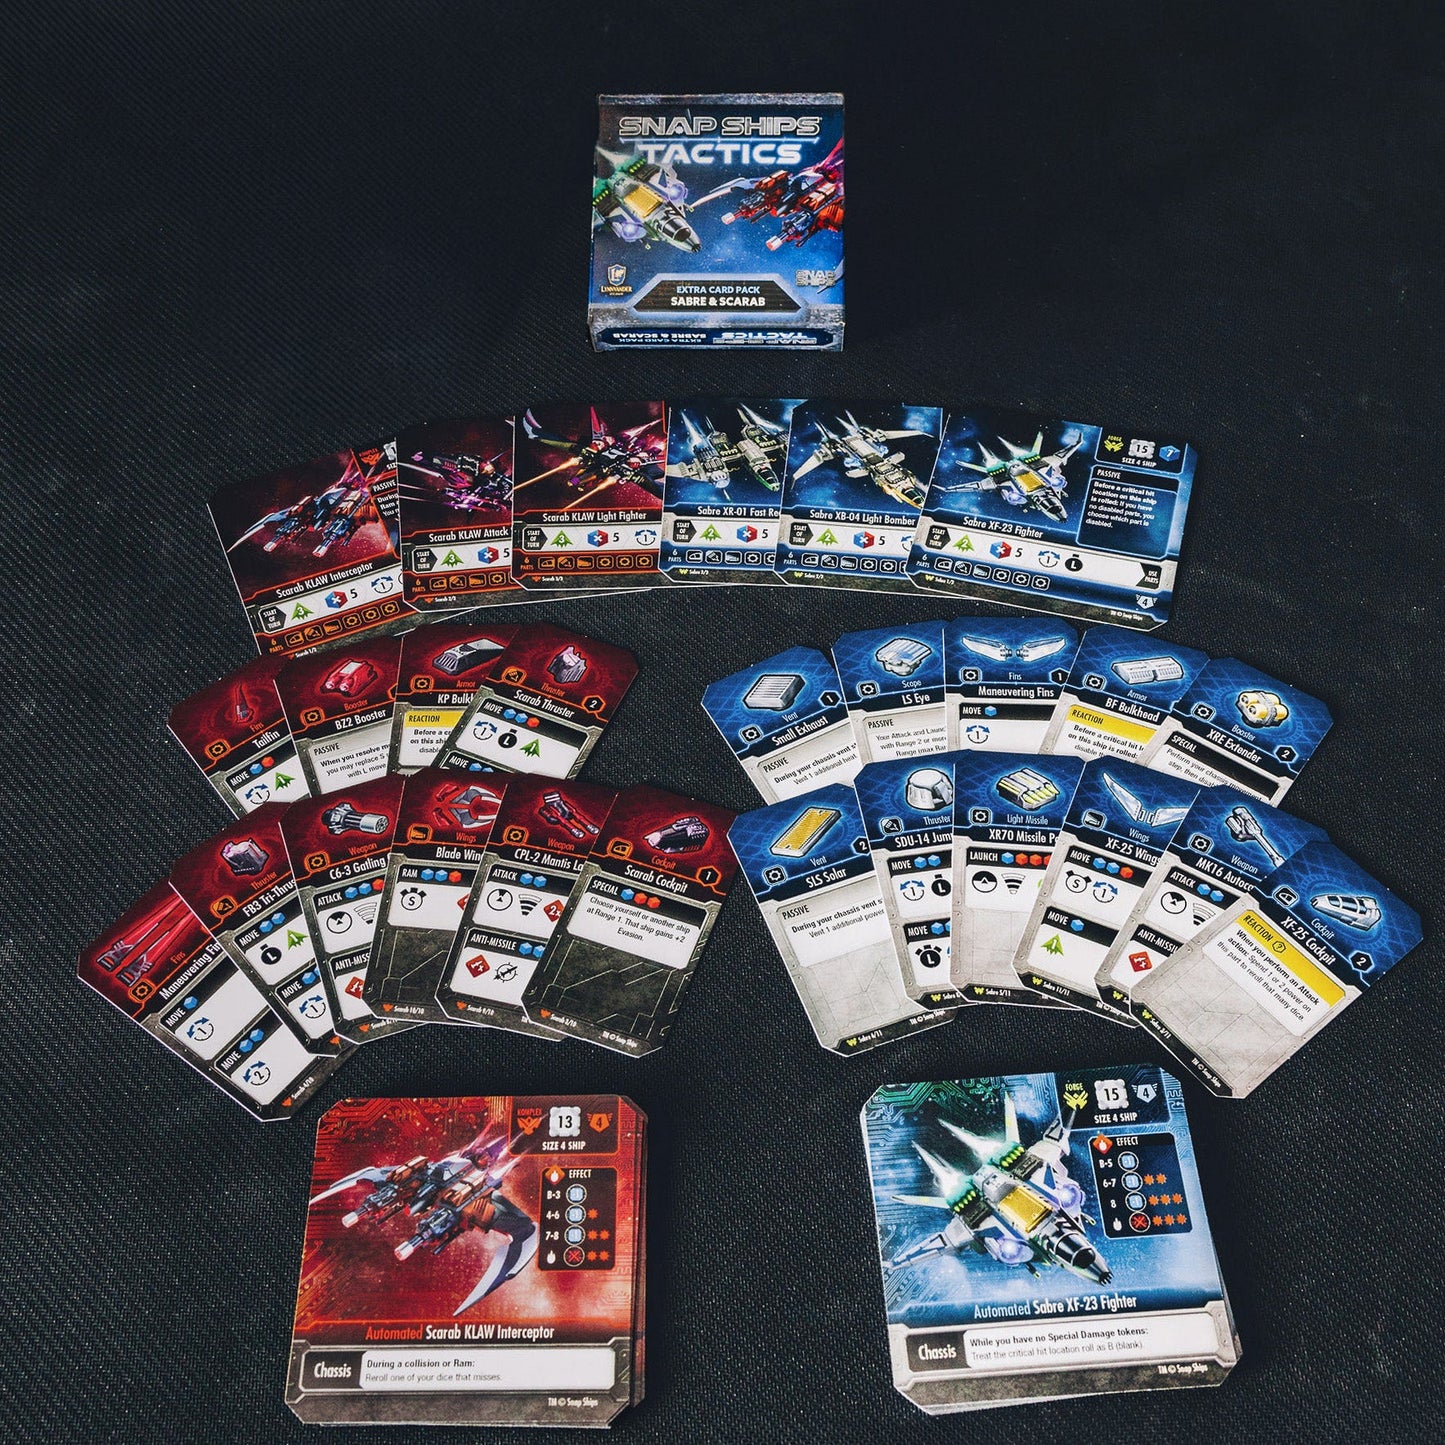 Extra Sabre and Scarab Card Pack (for Retail Stores Only)